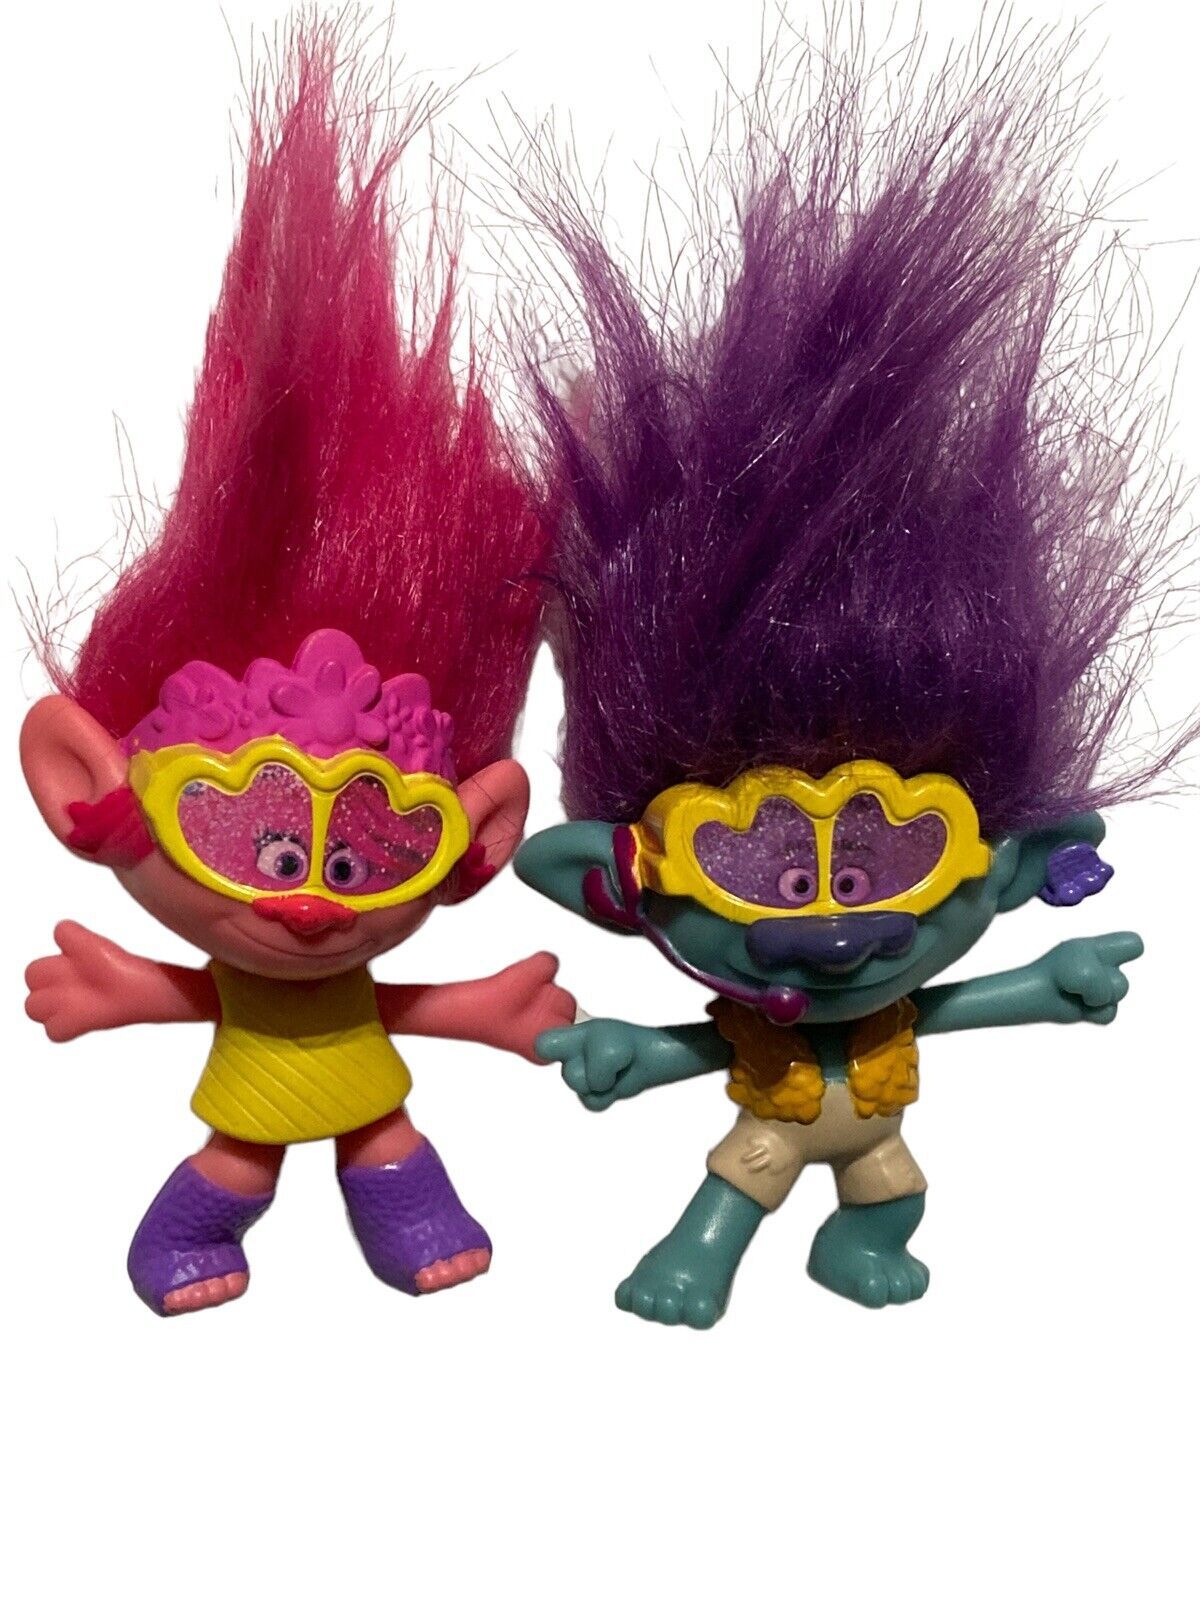 Primary image for 2020 McDonald's Trolls World Tour PARTY BRANCH & POPPY Figures Happy Meal Toys